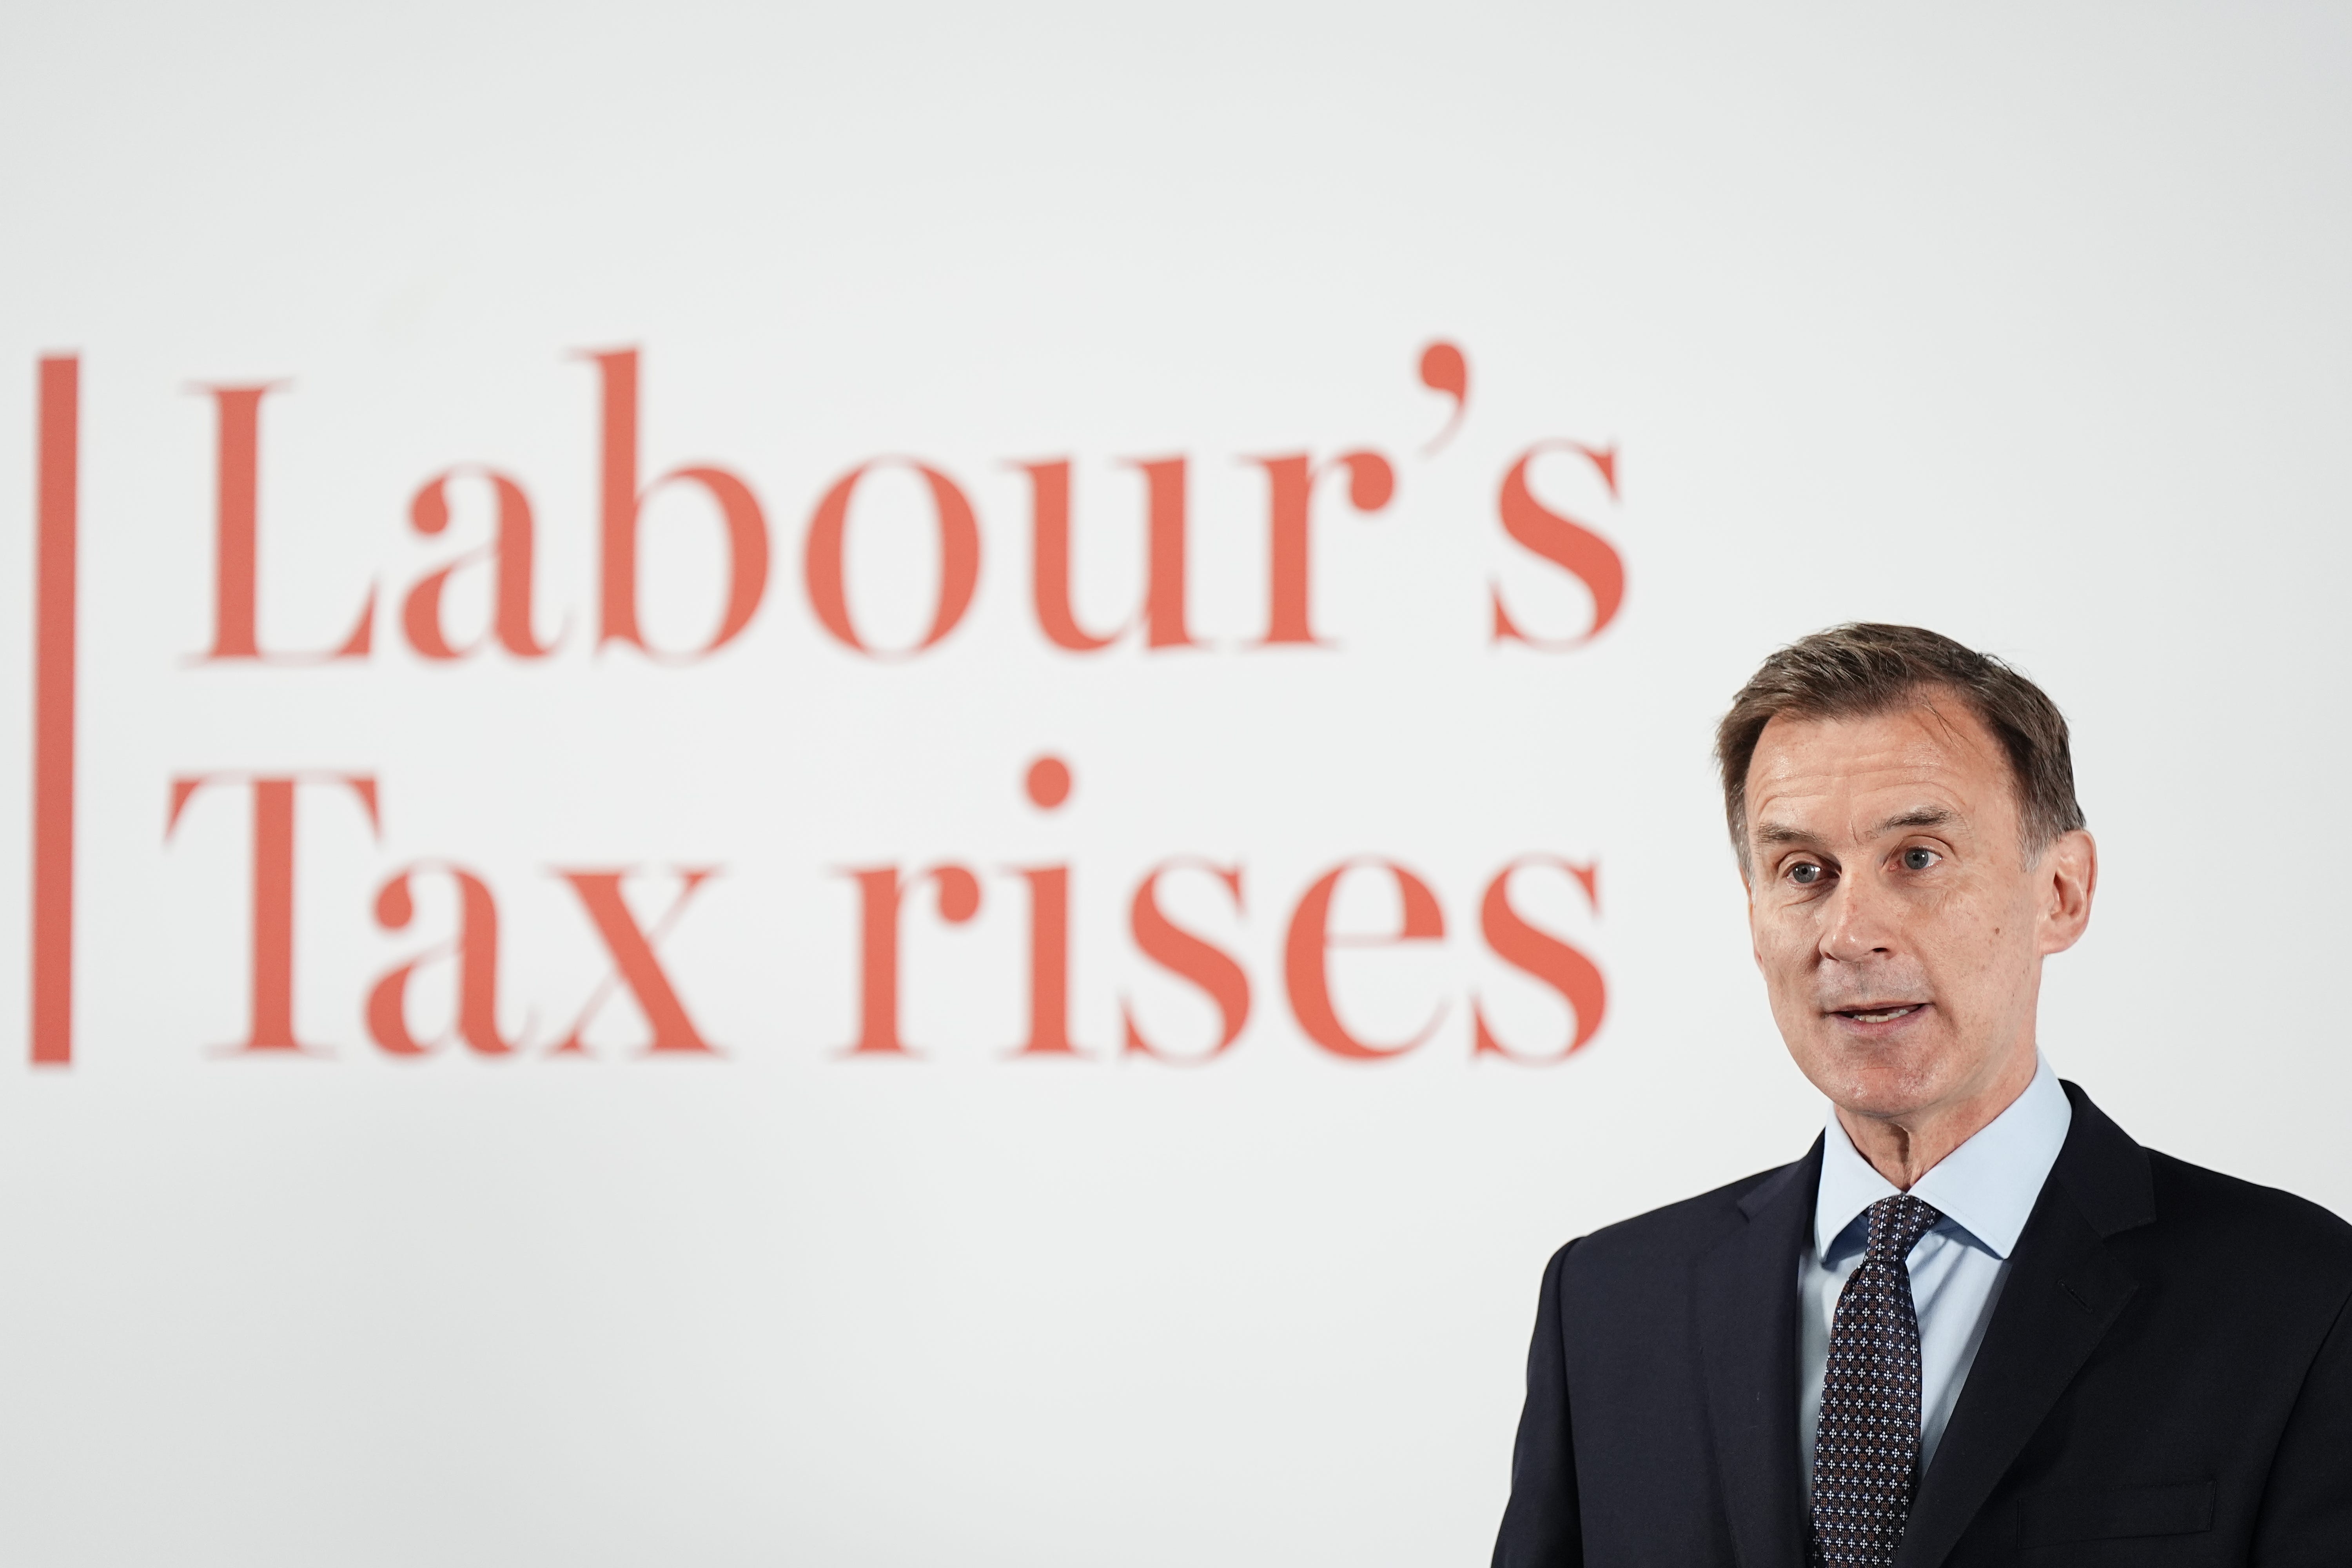 Chancellor Jeremy Hunt used a speech on Friday to claim that tax would rise under a Labour government